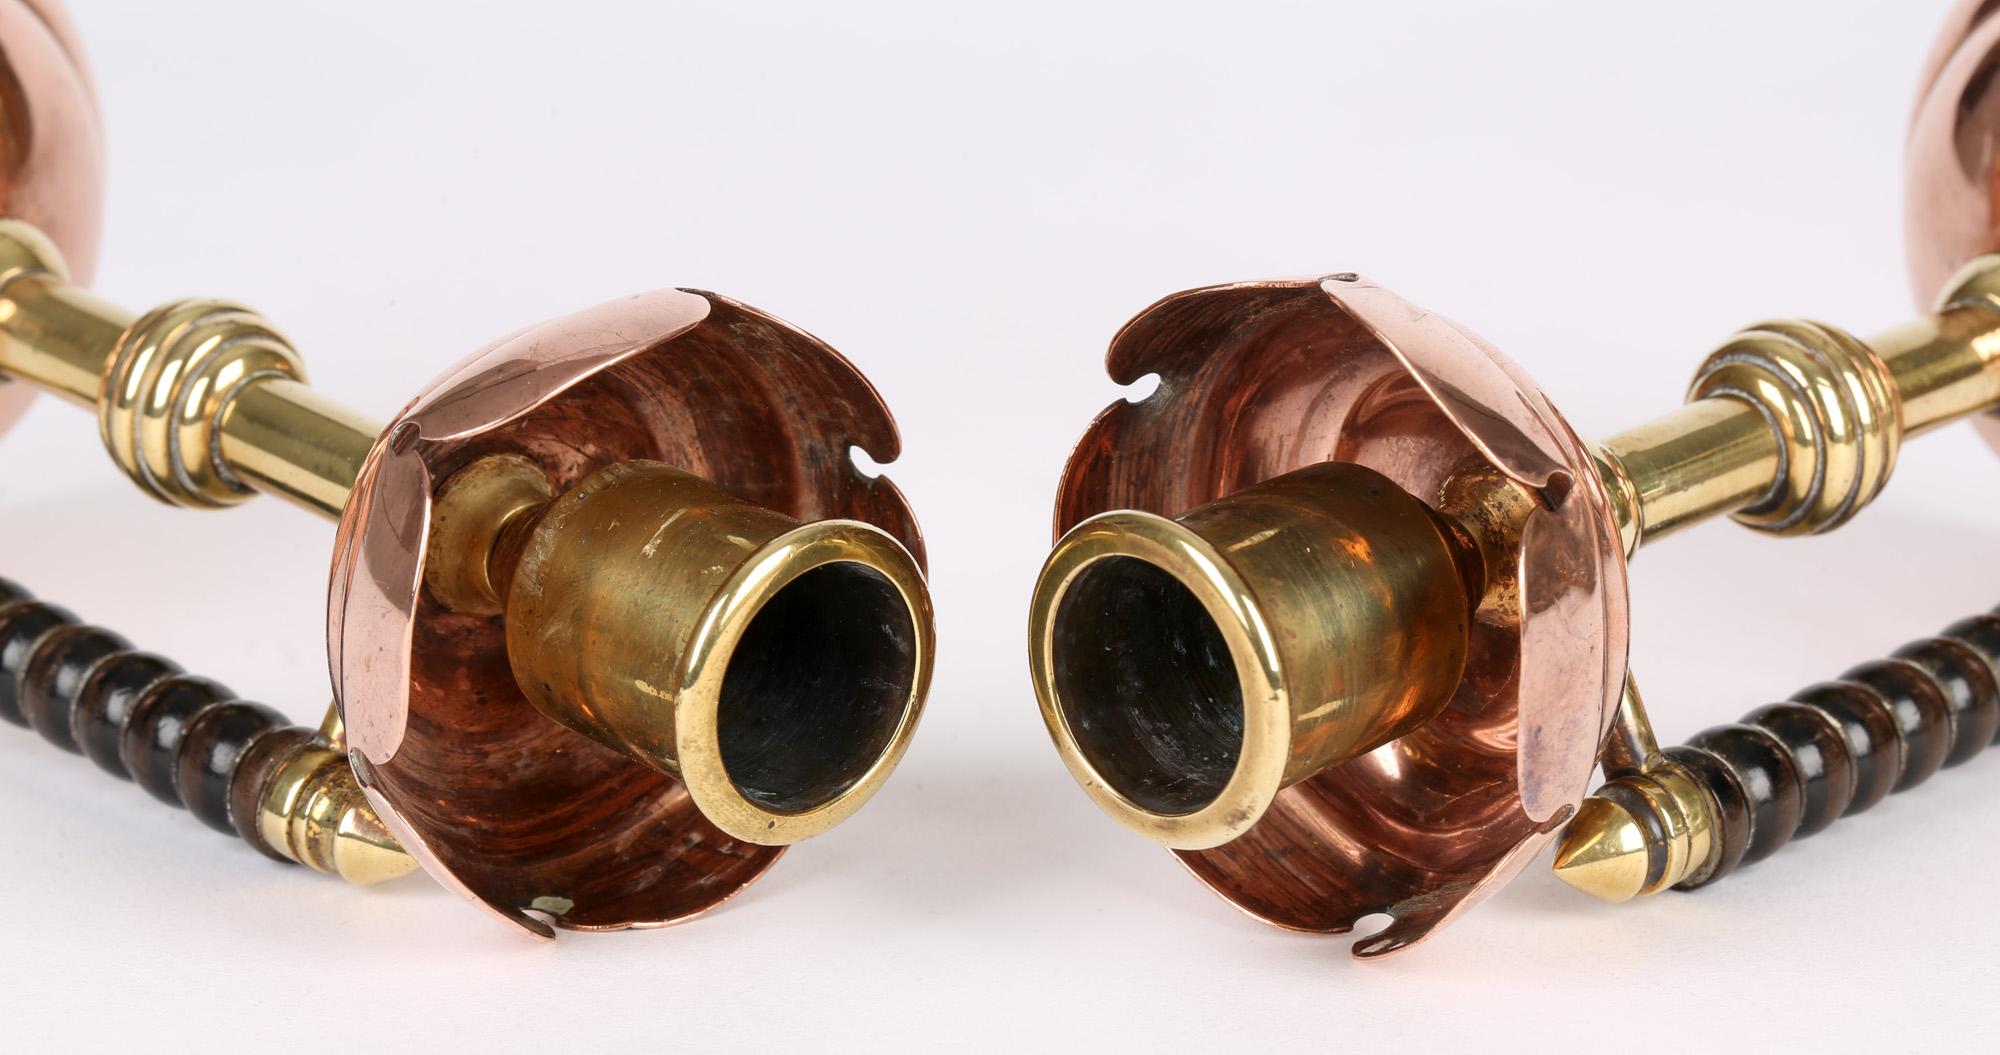 A very stylish pair Arts & Crafts copper and brass chambersticks after a design by Christopher Dresser and made by James Henry Stone of Birmingham, circa 1886. The chambersticks stand on rounded raised and shaped weighted copper bases with brass